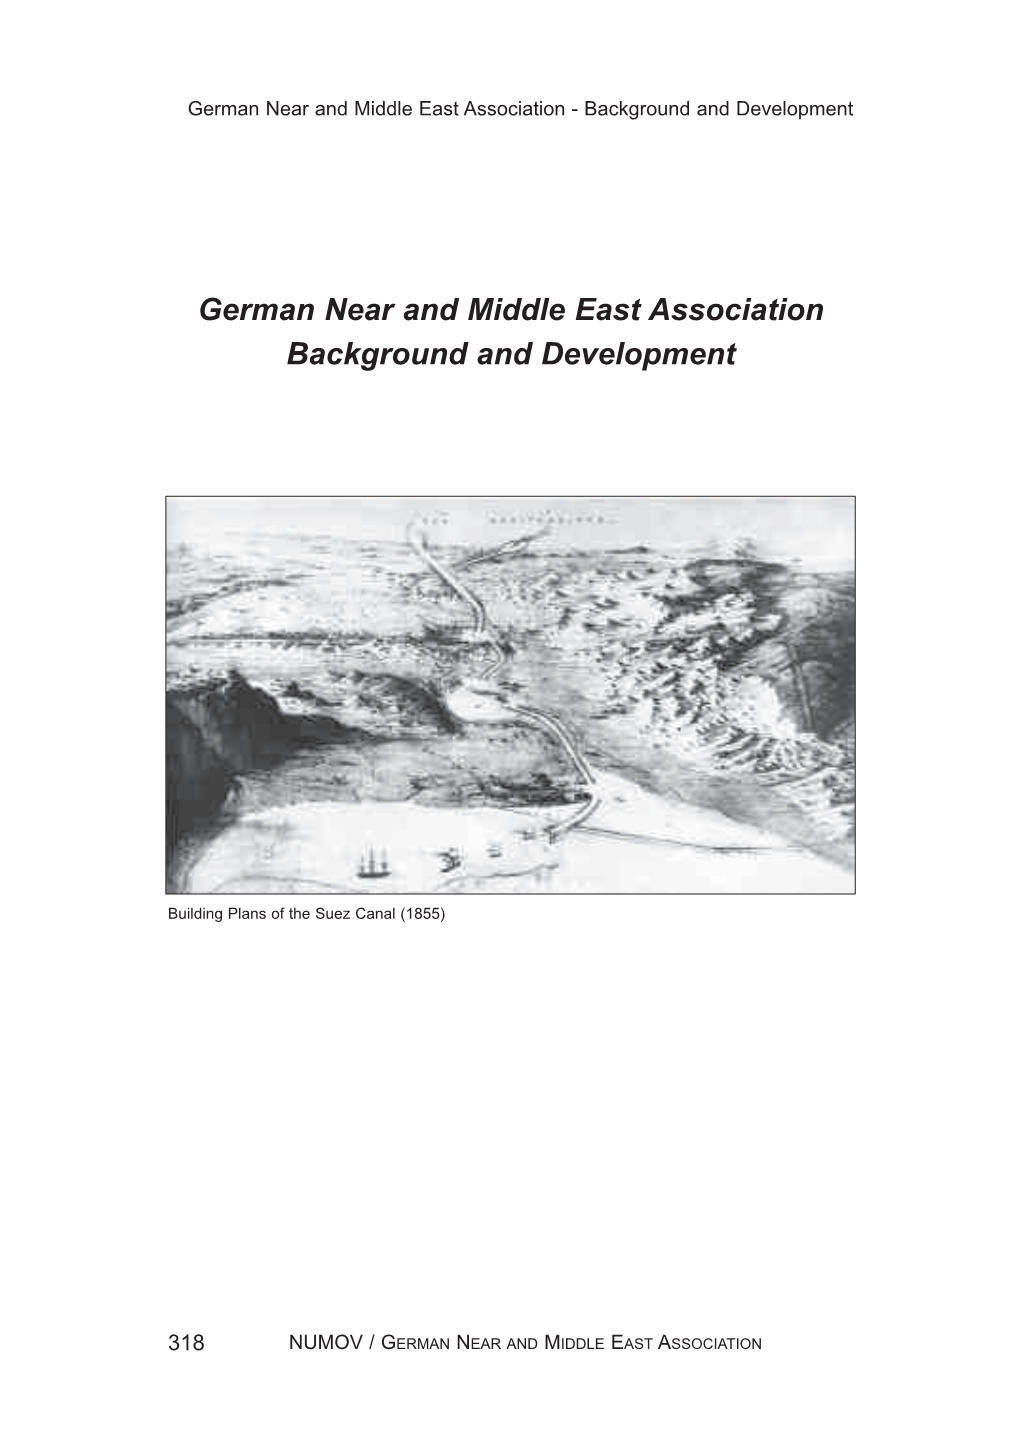 German Near and Middle East Association Background and Development